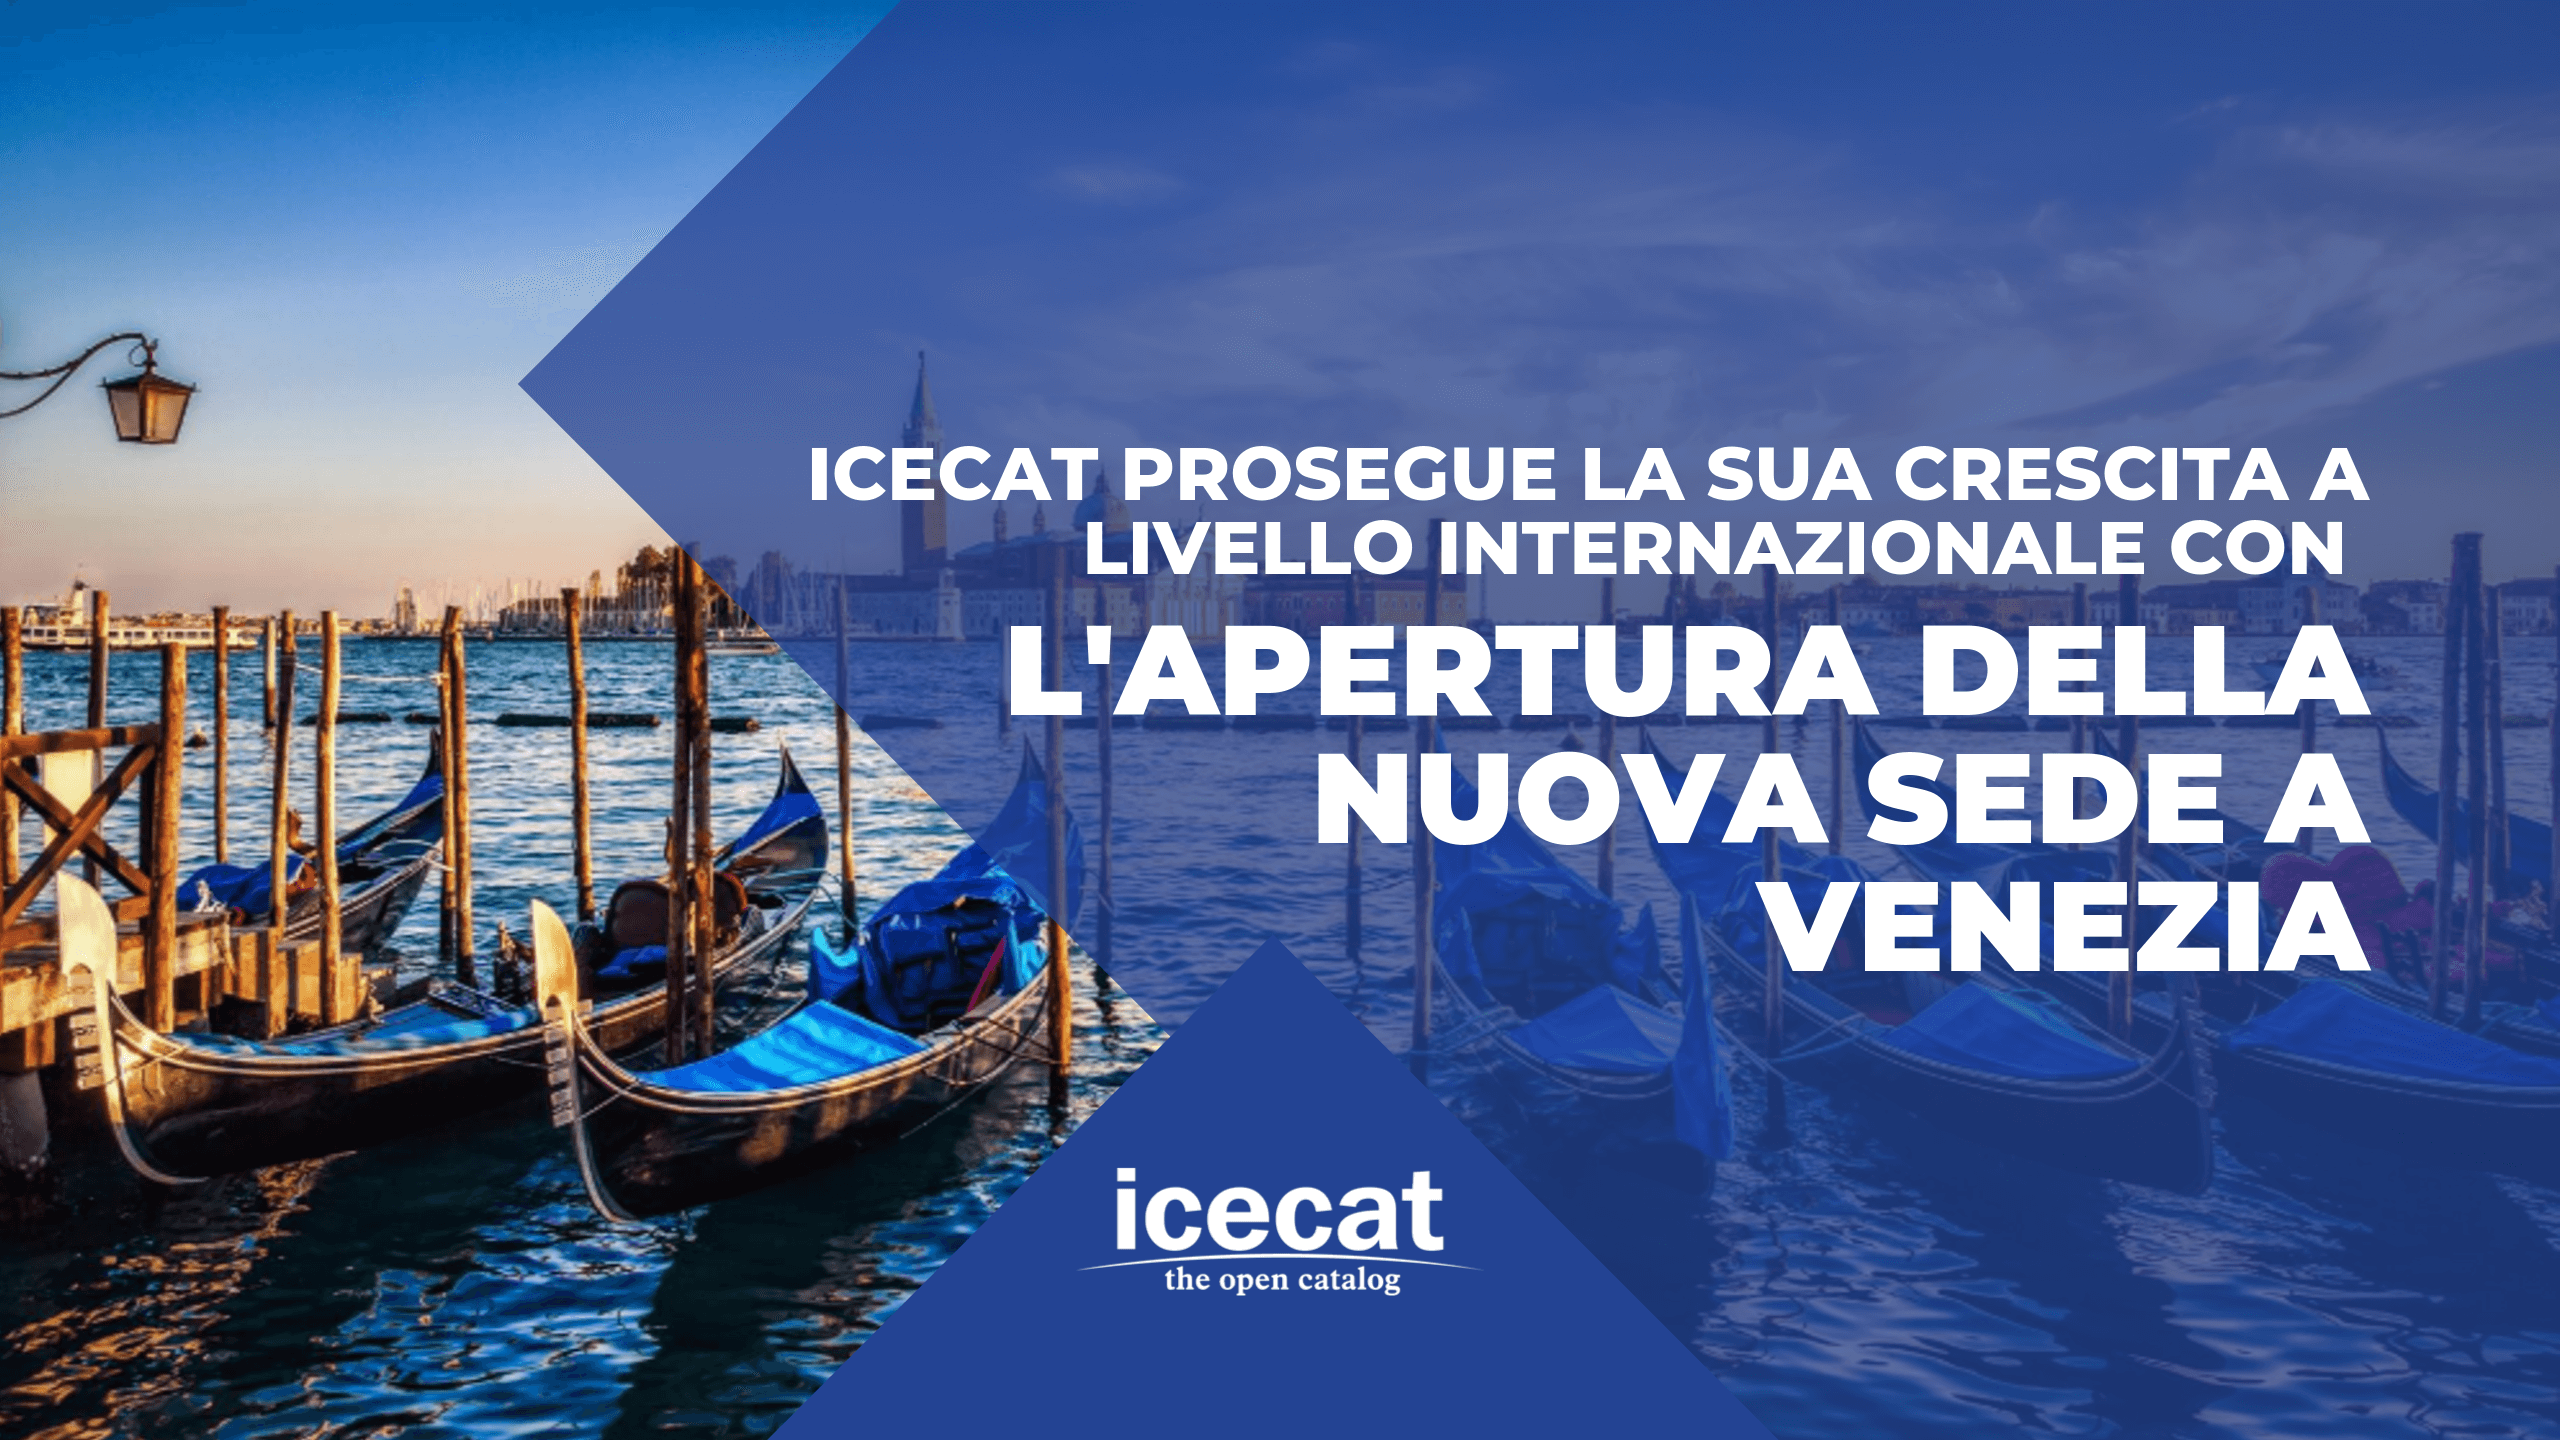 New office in Italy opened for Icecat